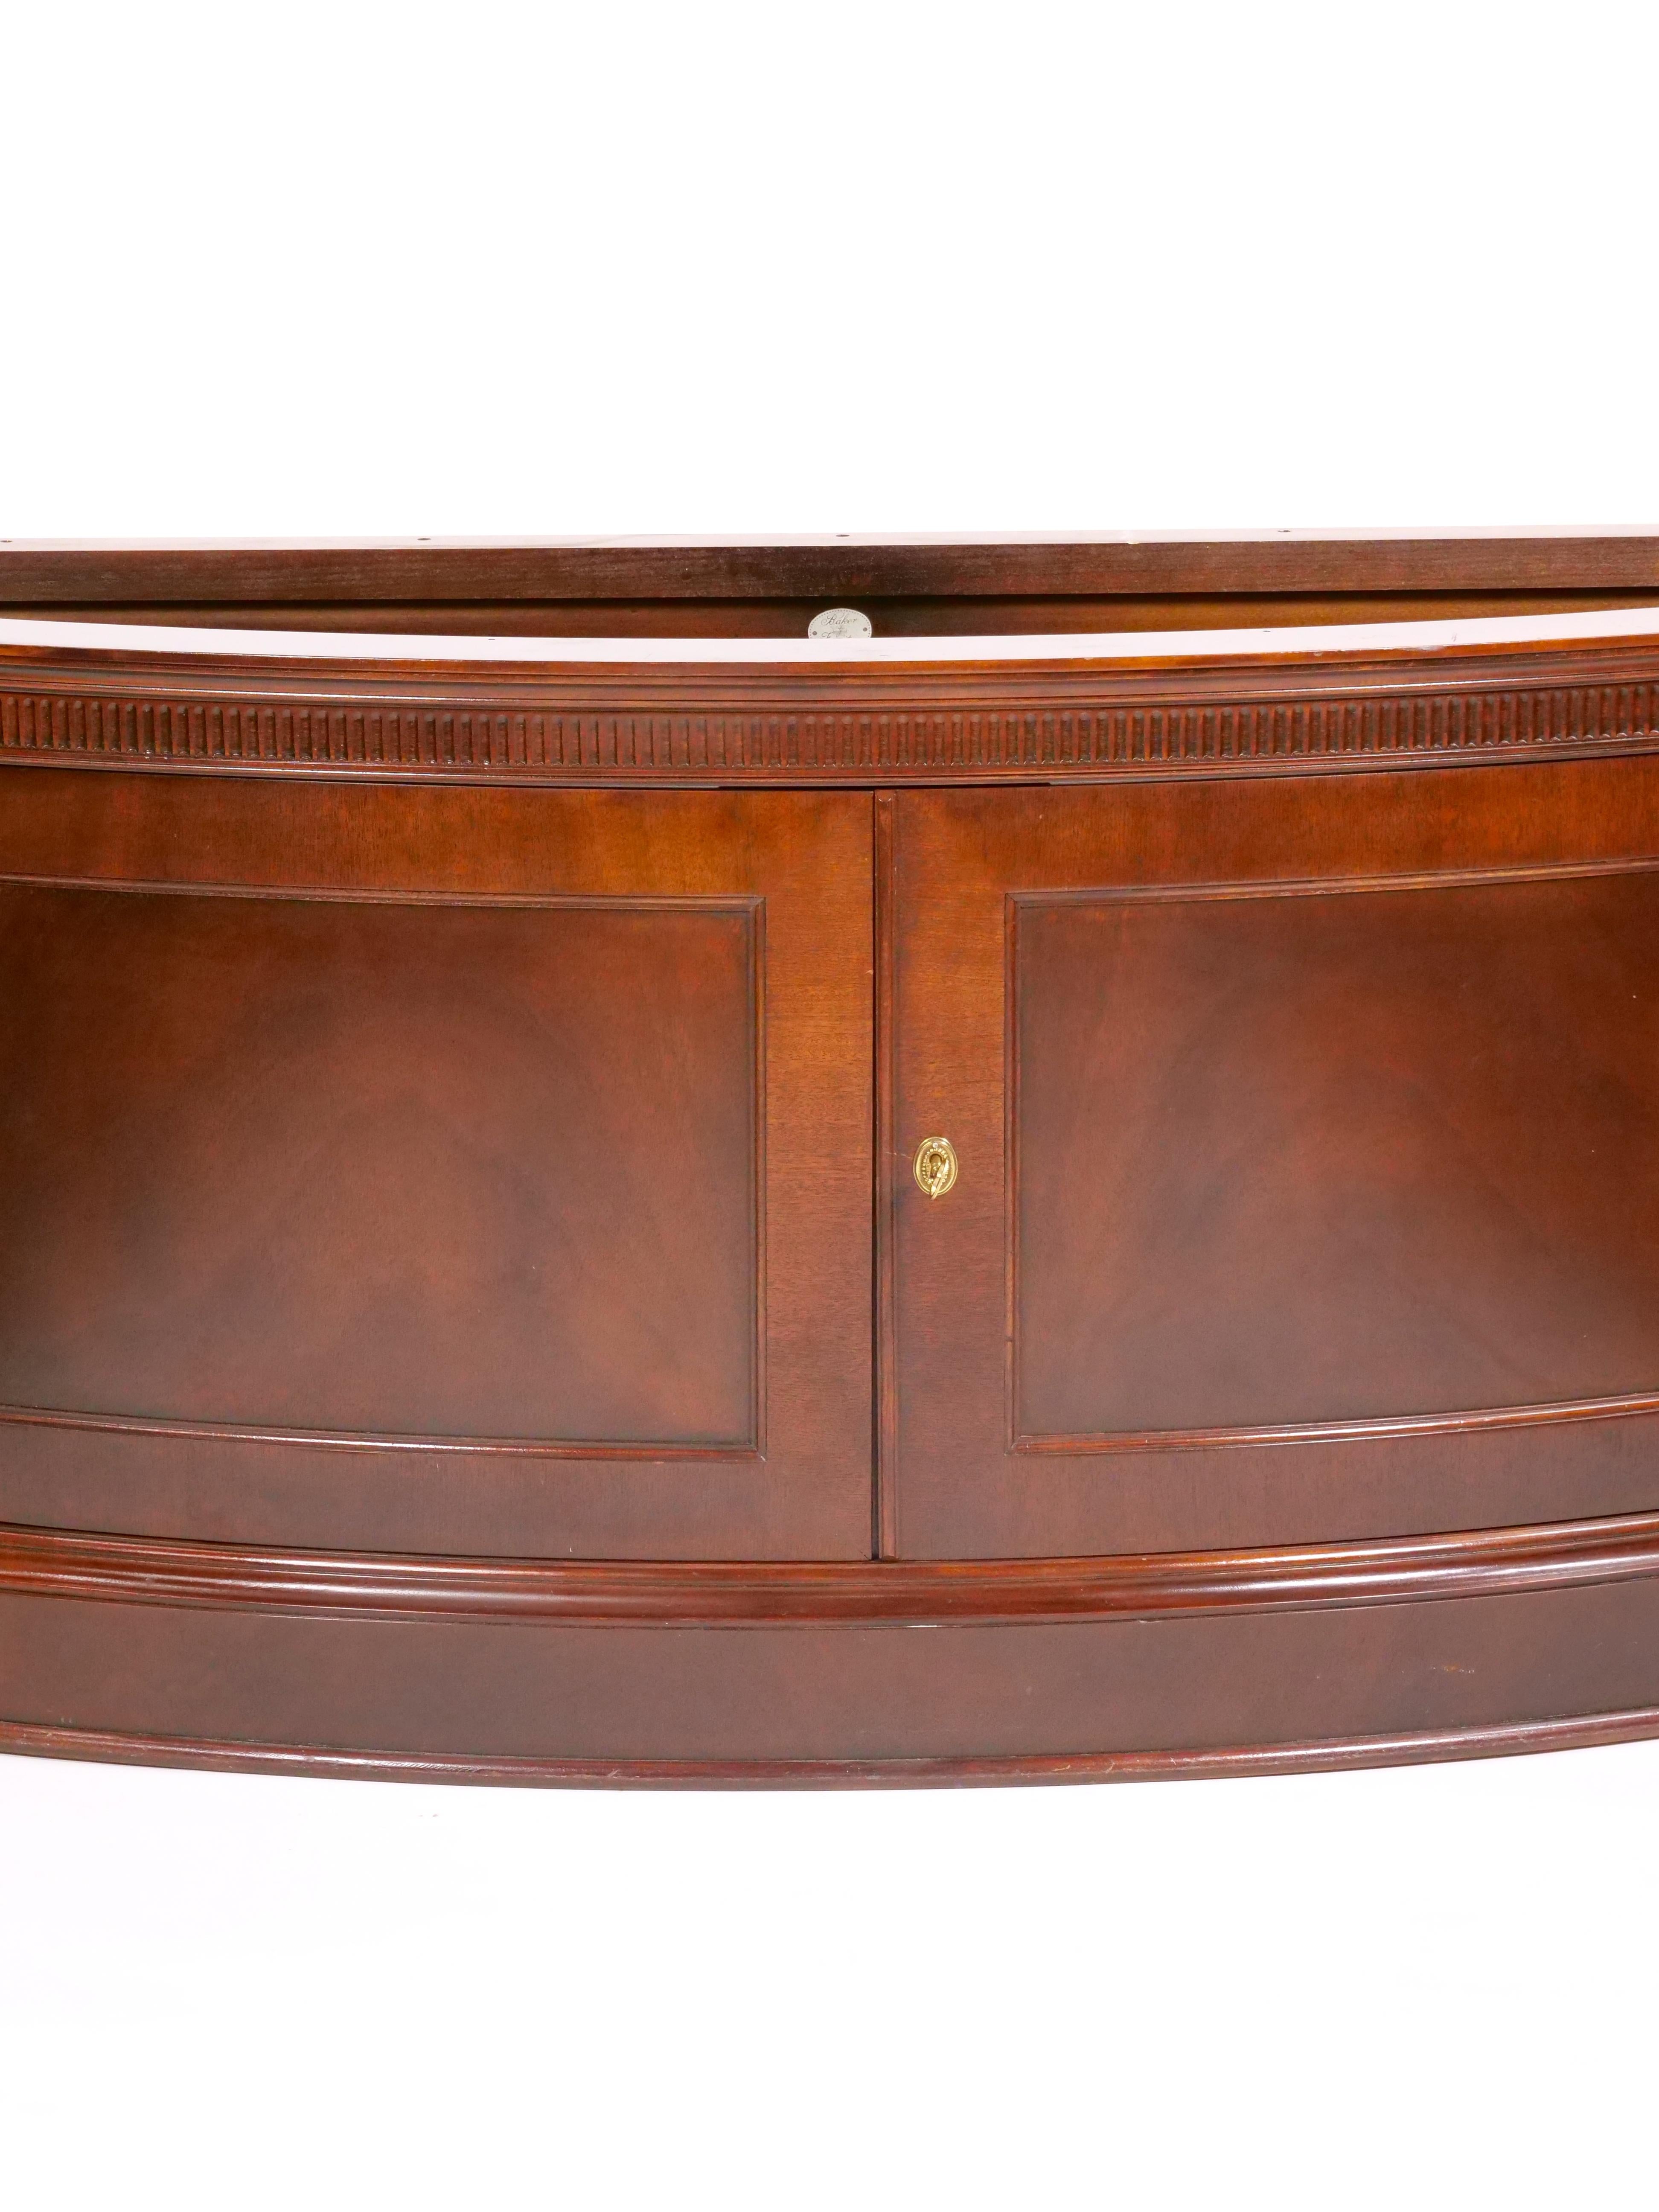 Early 20th Century  Mahogany Wood Demilune Shape Historical Charleston Cabinet For Sale 5